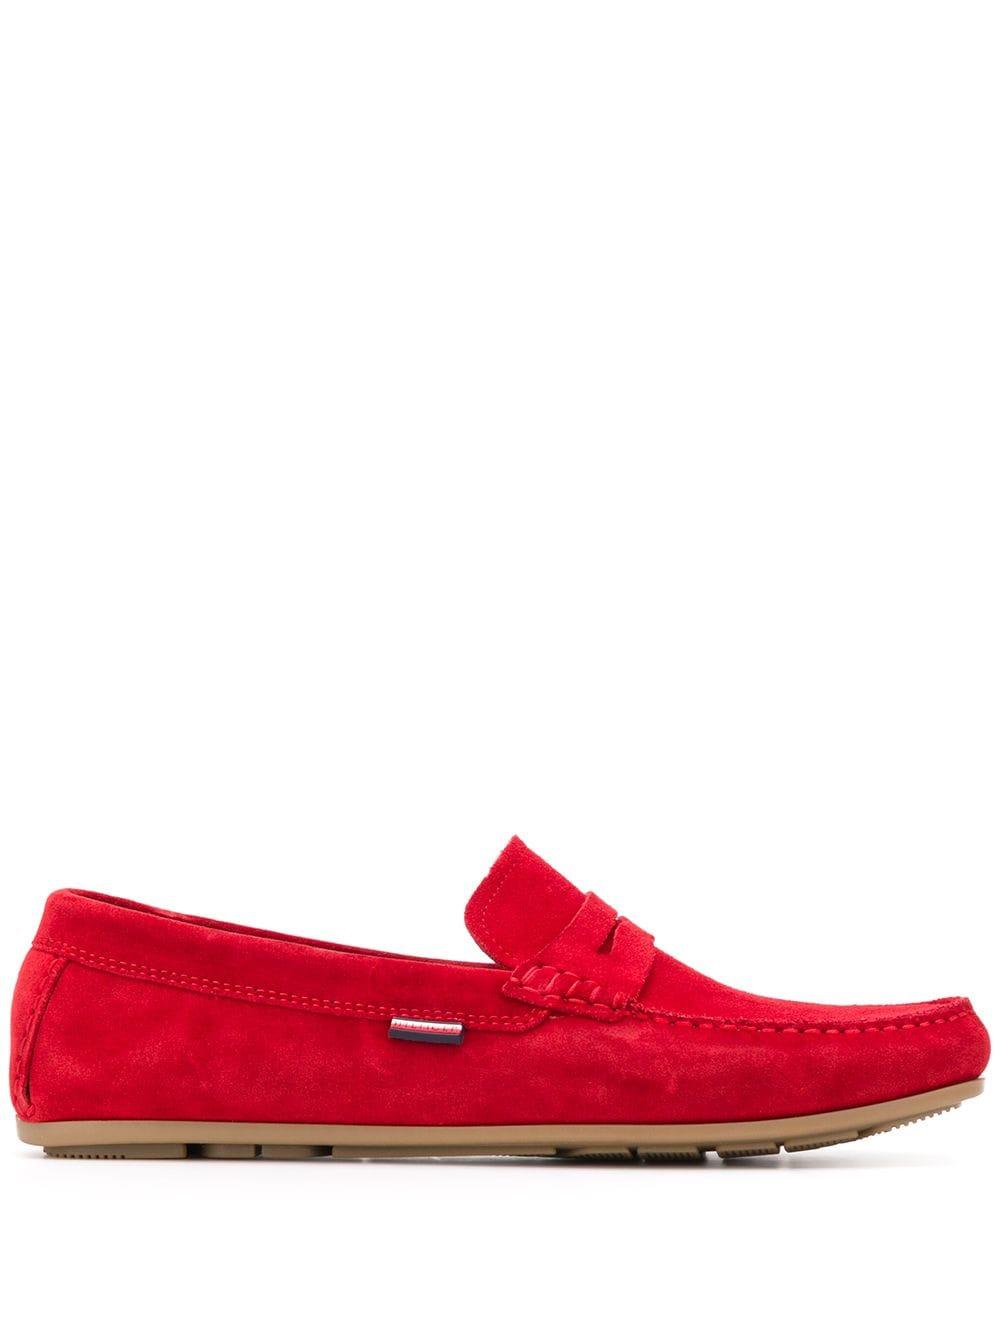 Tommy Hilfiger Suede Penny Loafers in Red for Men - Lyst